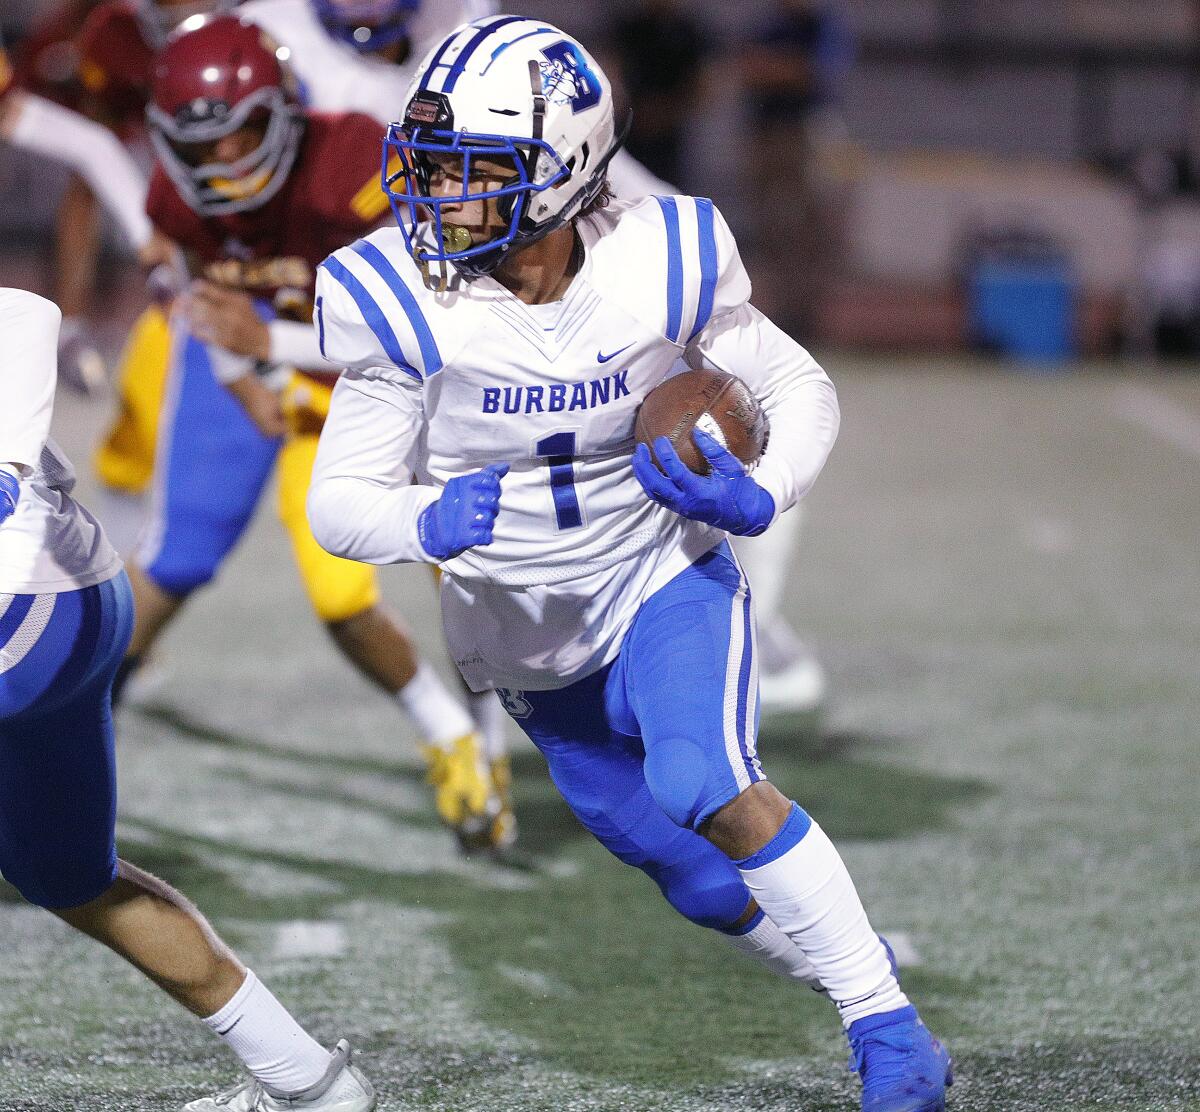 Burbank's Isaac Glover carries the ball on a first quarter run against Arcadia in a Pacific League football opener at Arcadia High School on Thursday, September 19, 2019.